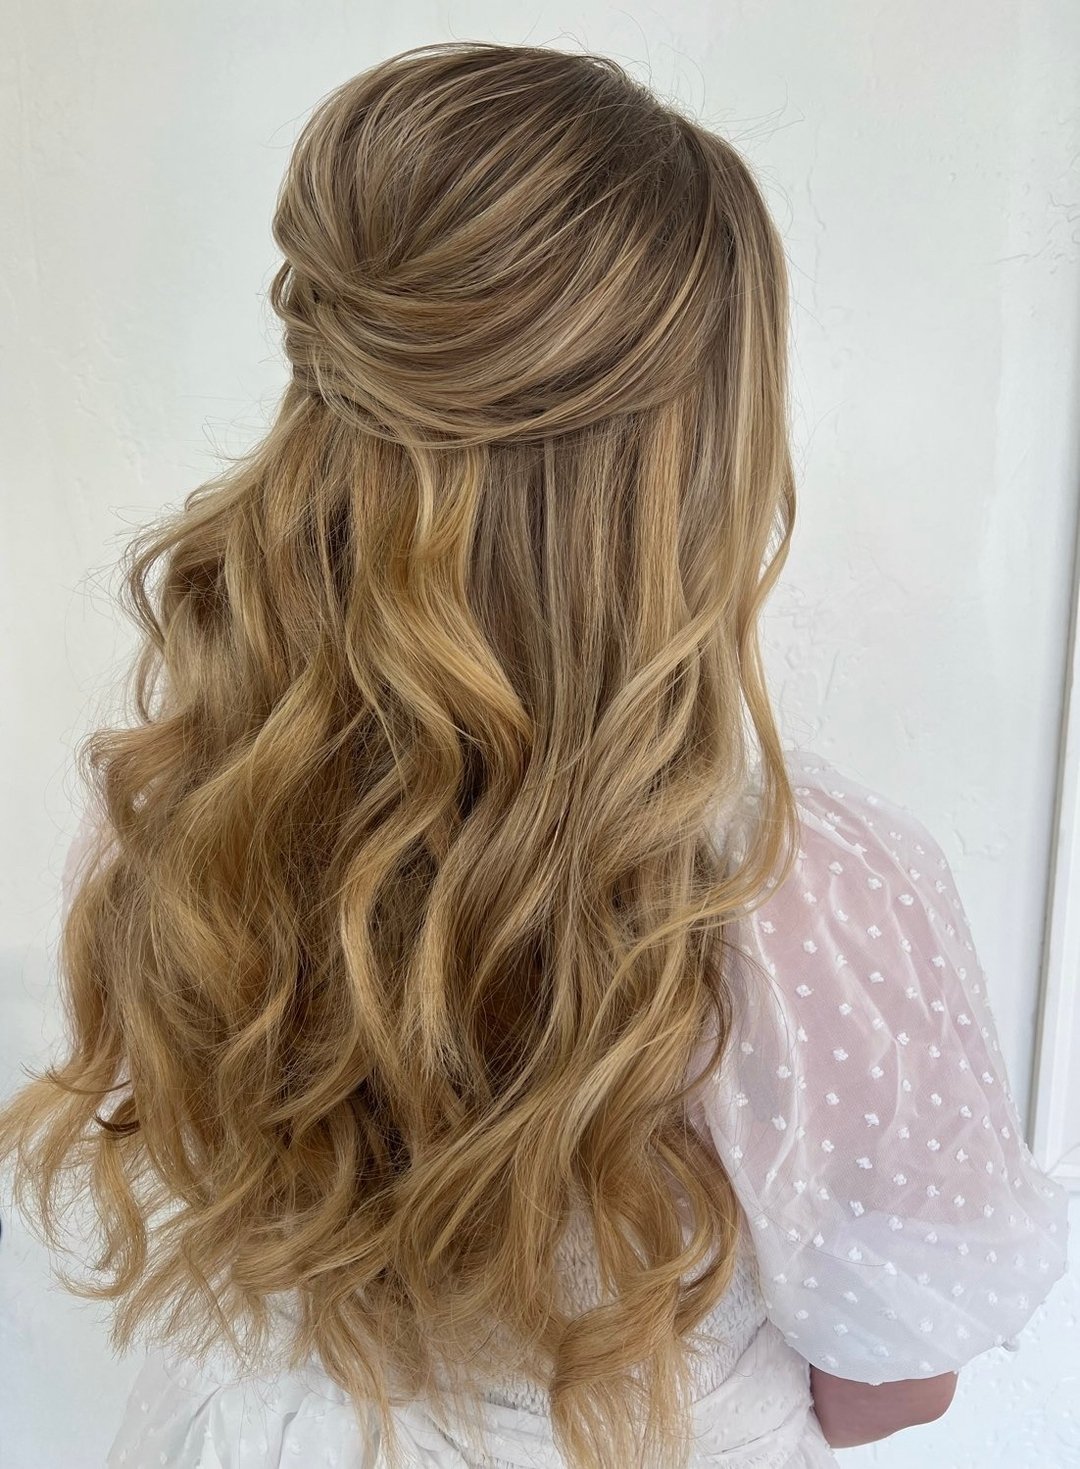 When our clip in extensions just make a style that much better 🖤  @taylorrayttp created this STUNNING half-up with lasting curls and all the fullness + volume! 

Dallas Hairstylist. Dallas Makeup Artist. Bridal Makeup. Bridal Hair. Texas Brides. 202